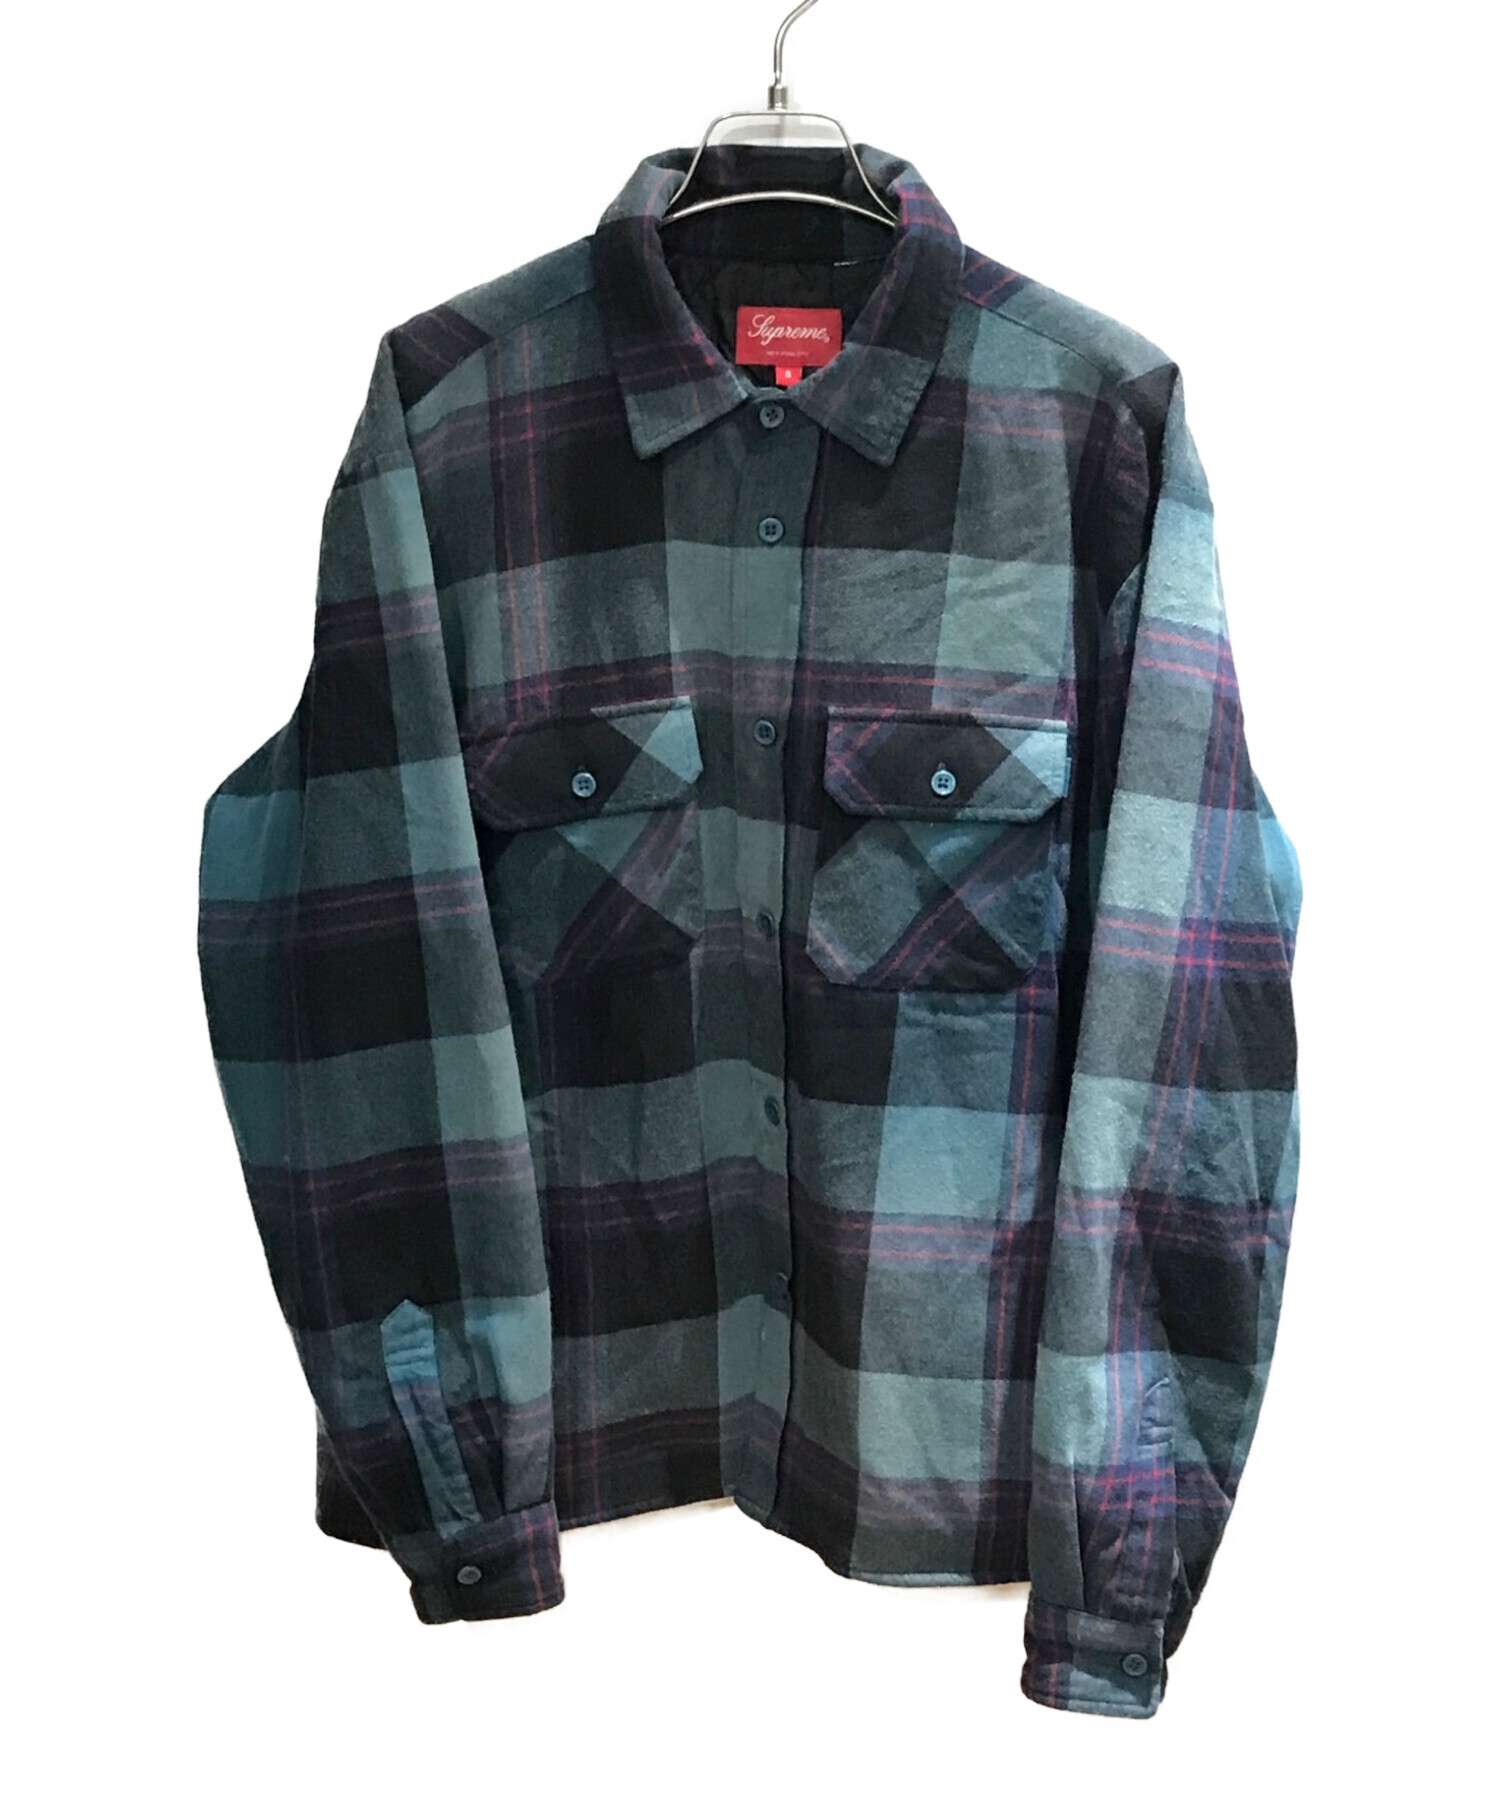 supreme 20aw quilted flannel shirt S